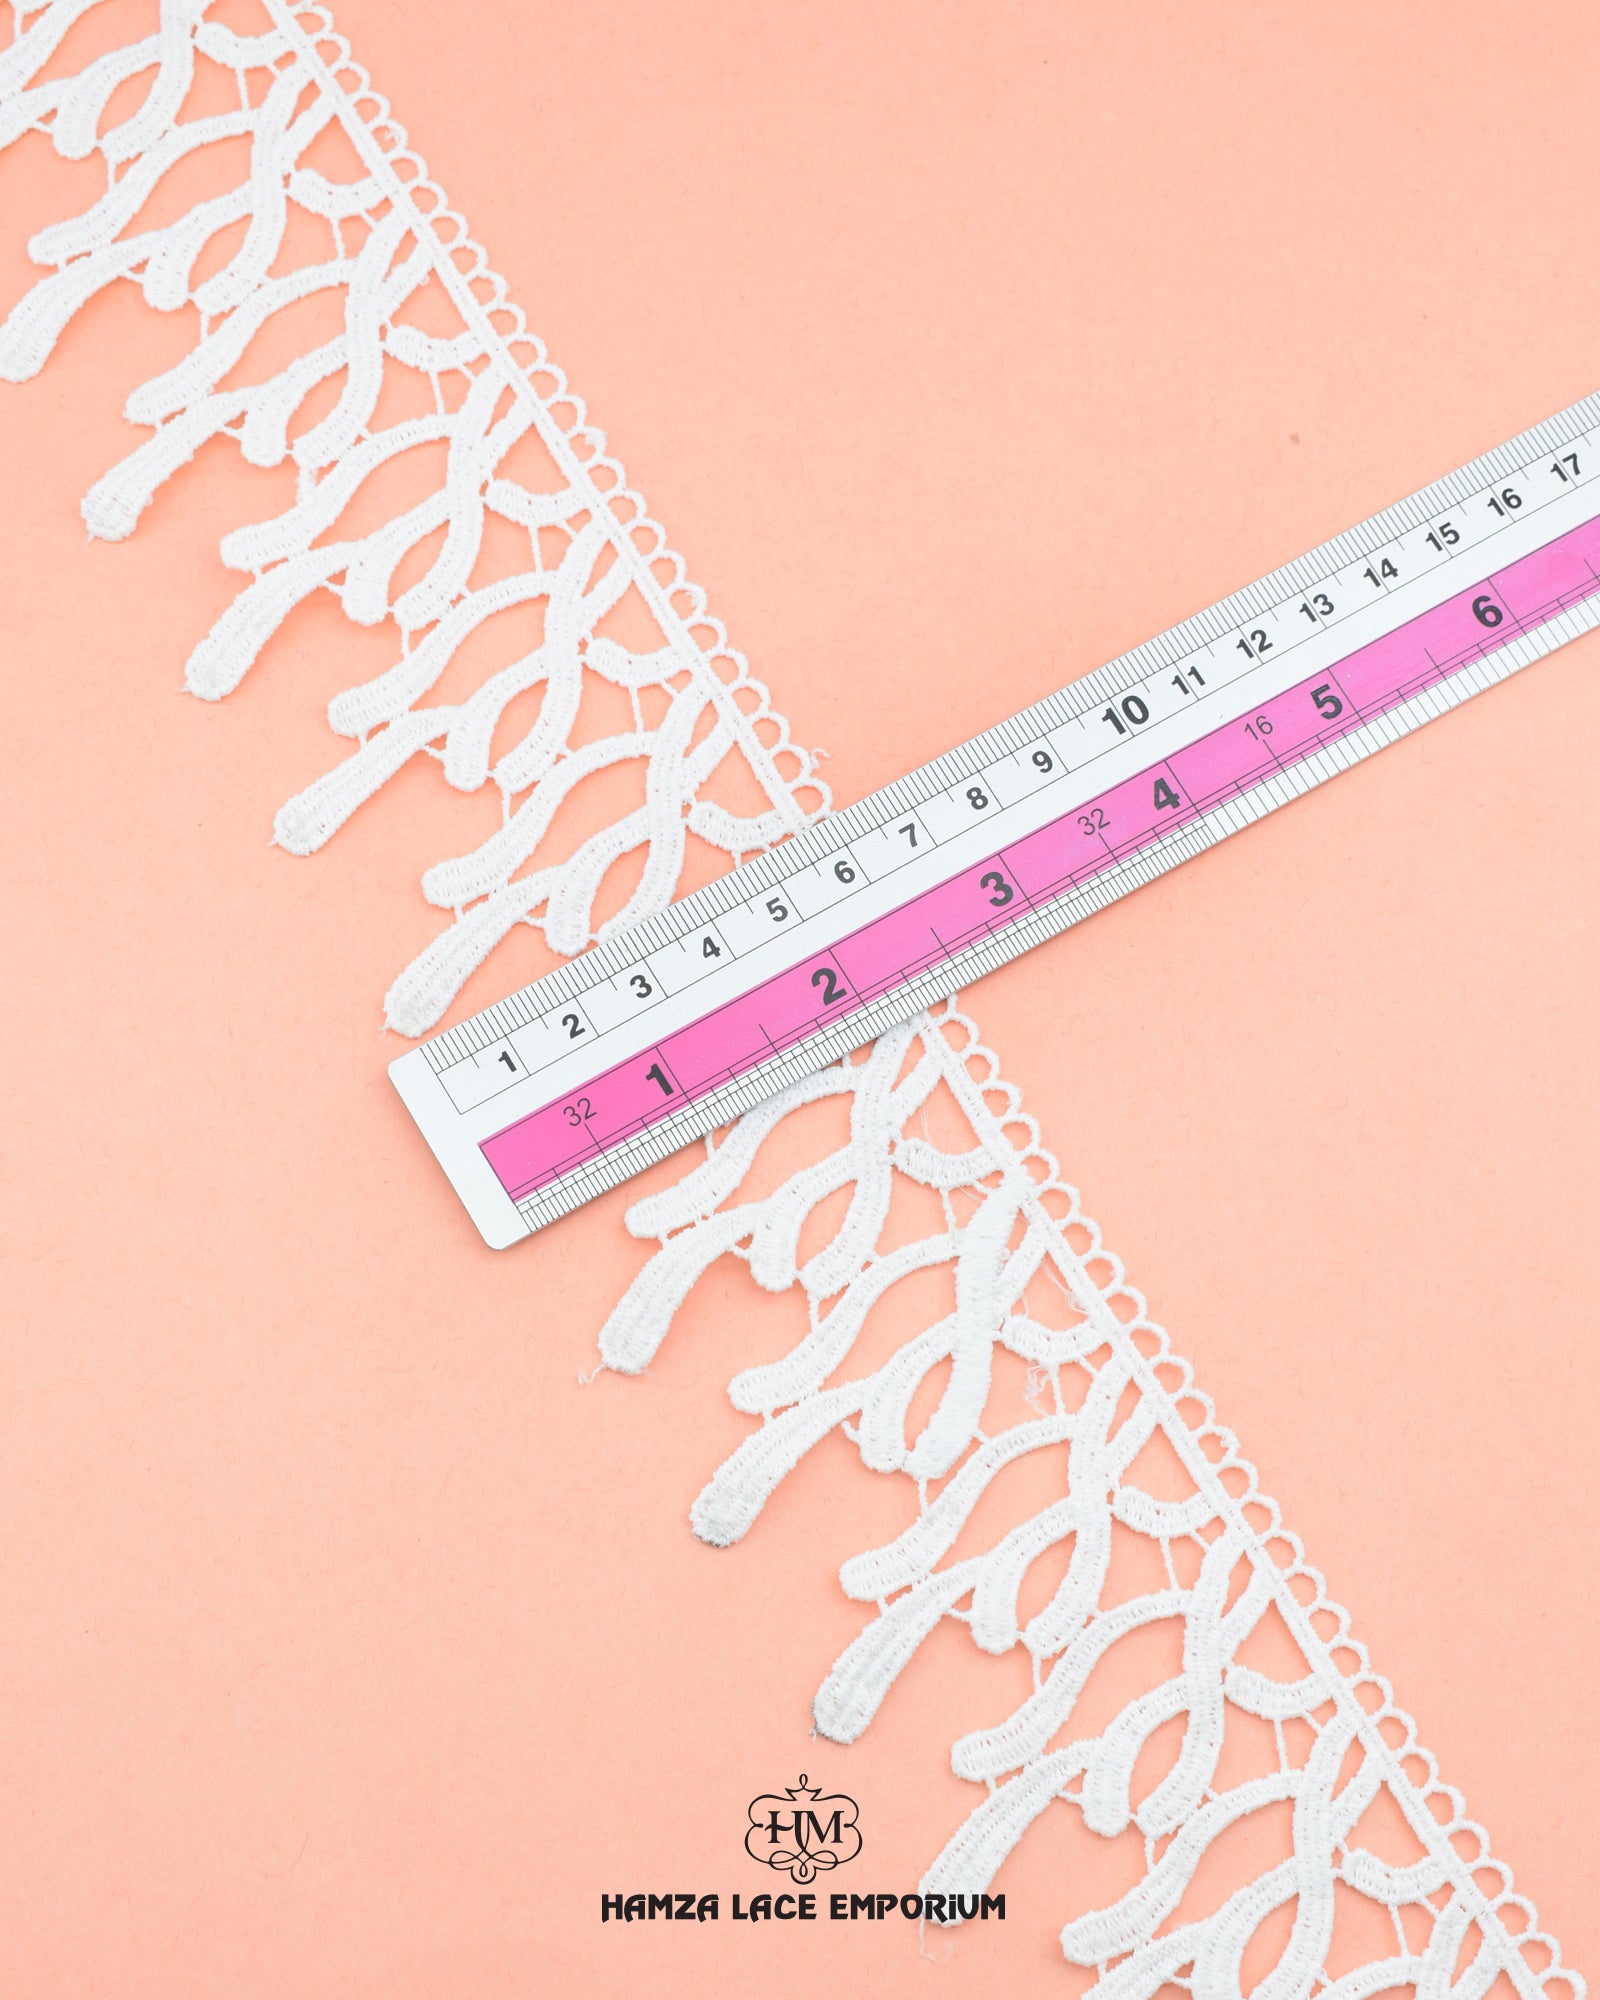 A scale is placed on the 'Edging Lace 21717' for the purpose to show its size that is 2.5 inches